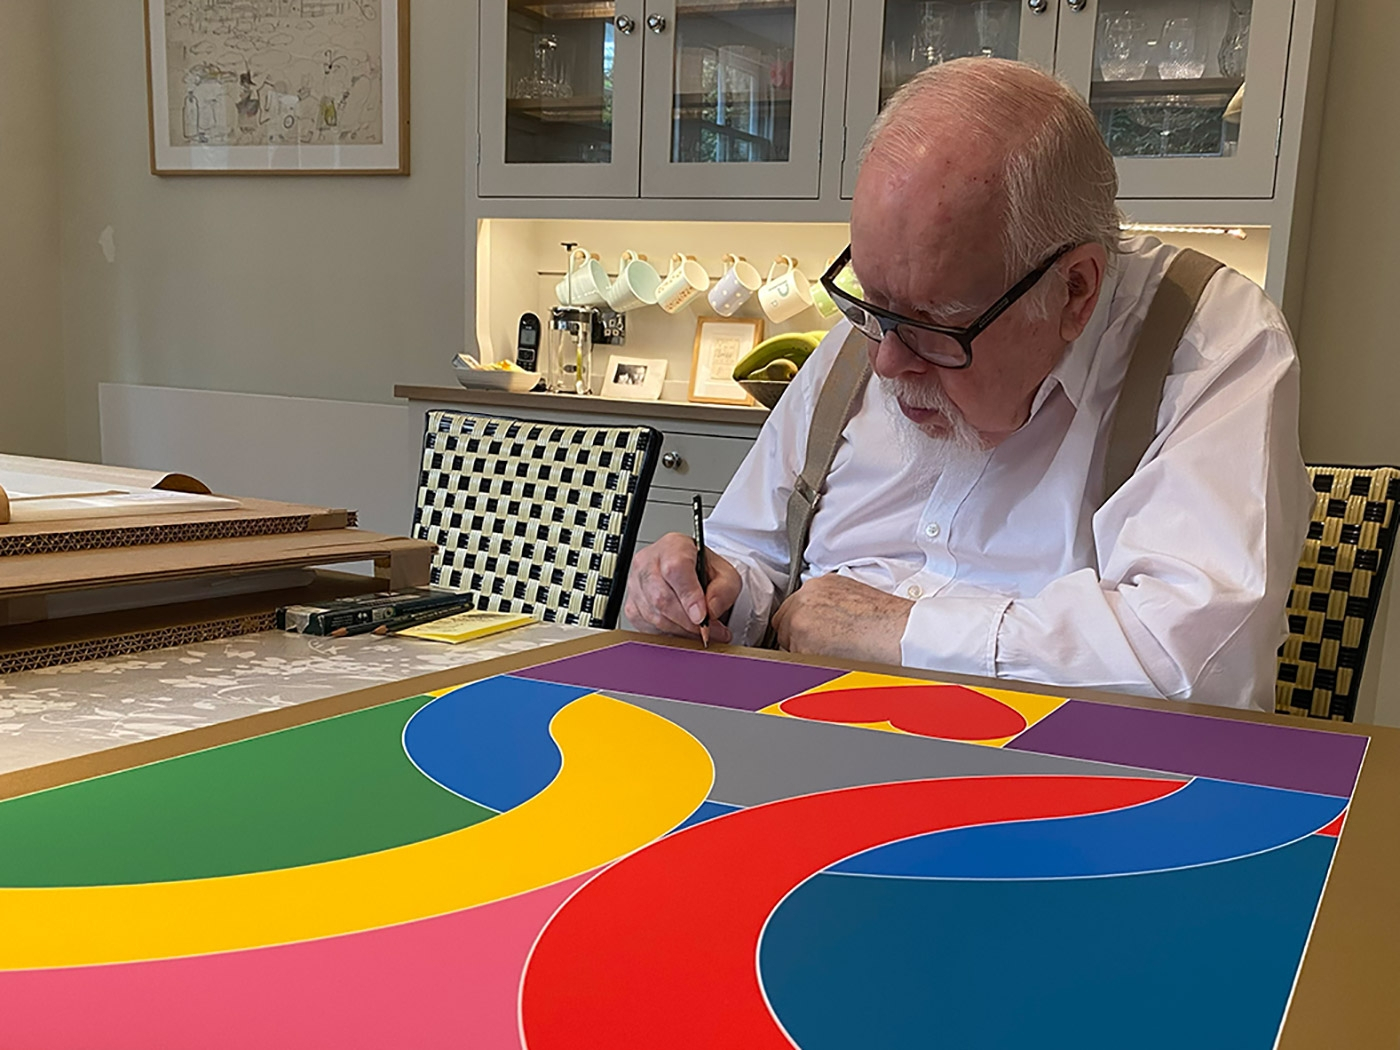 Peter signing his print at his home in London (2020)